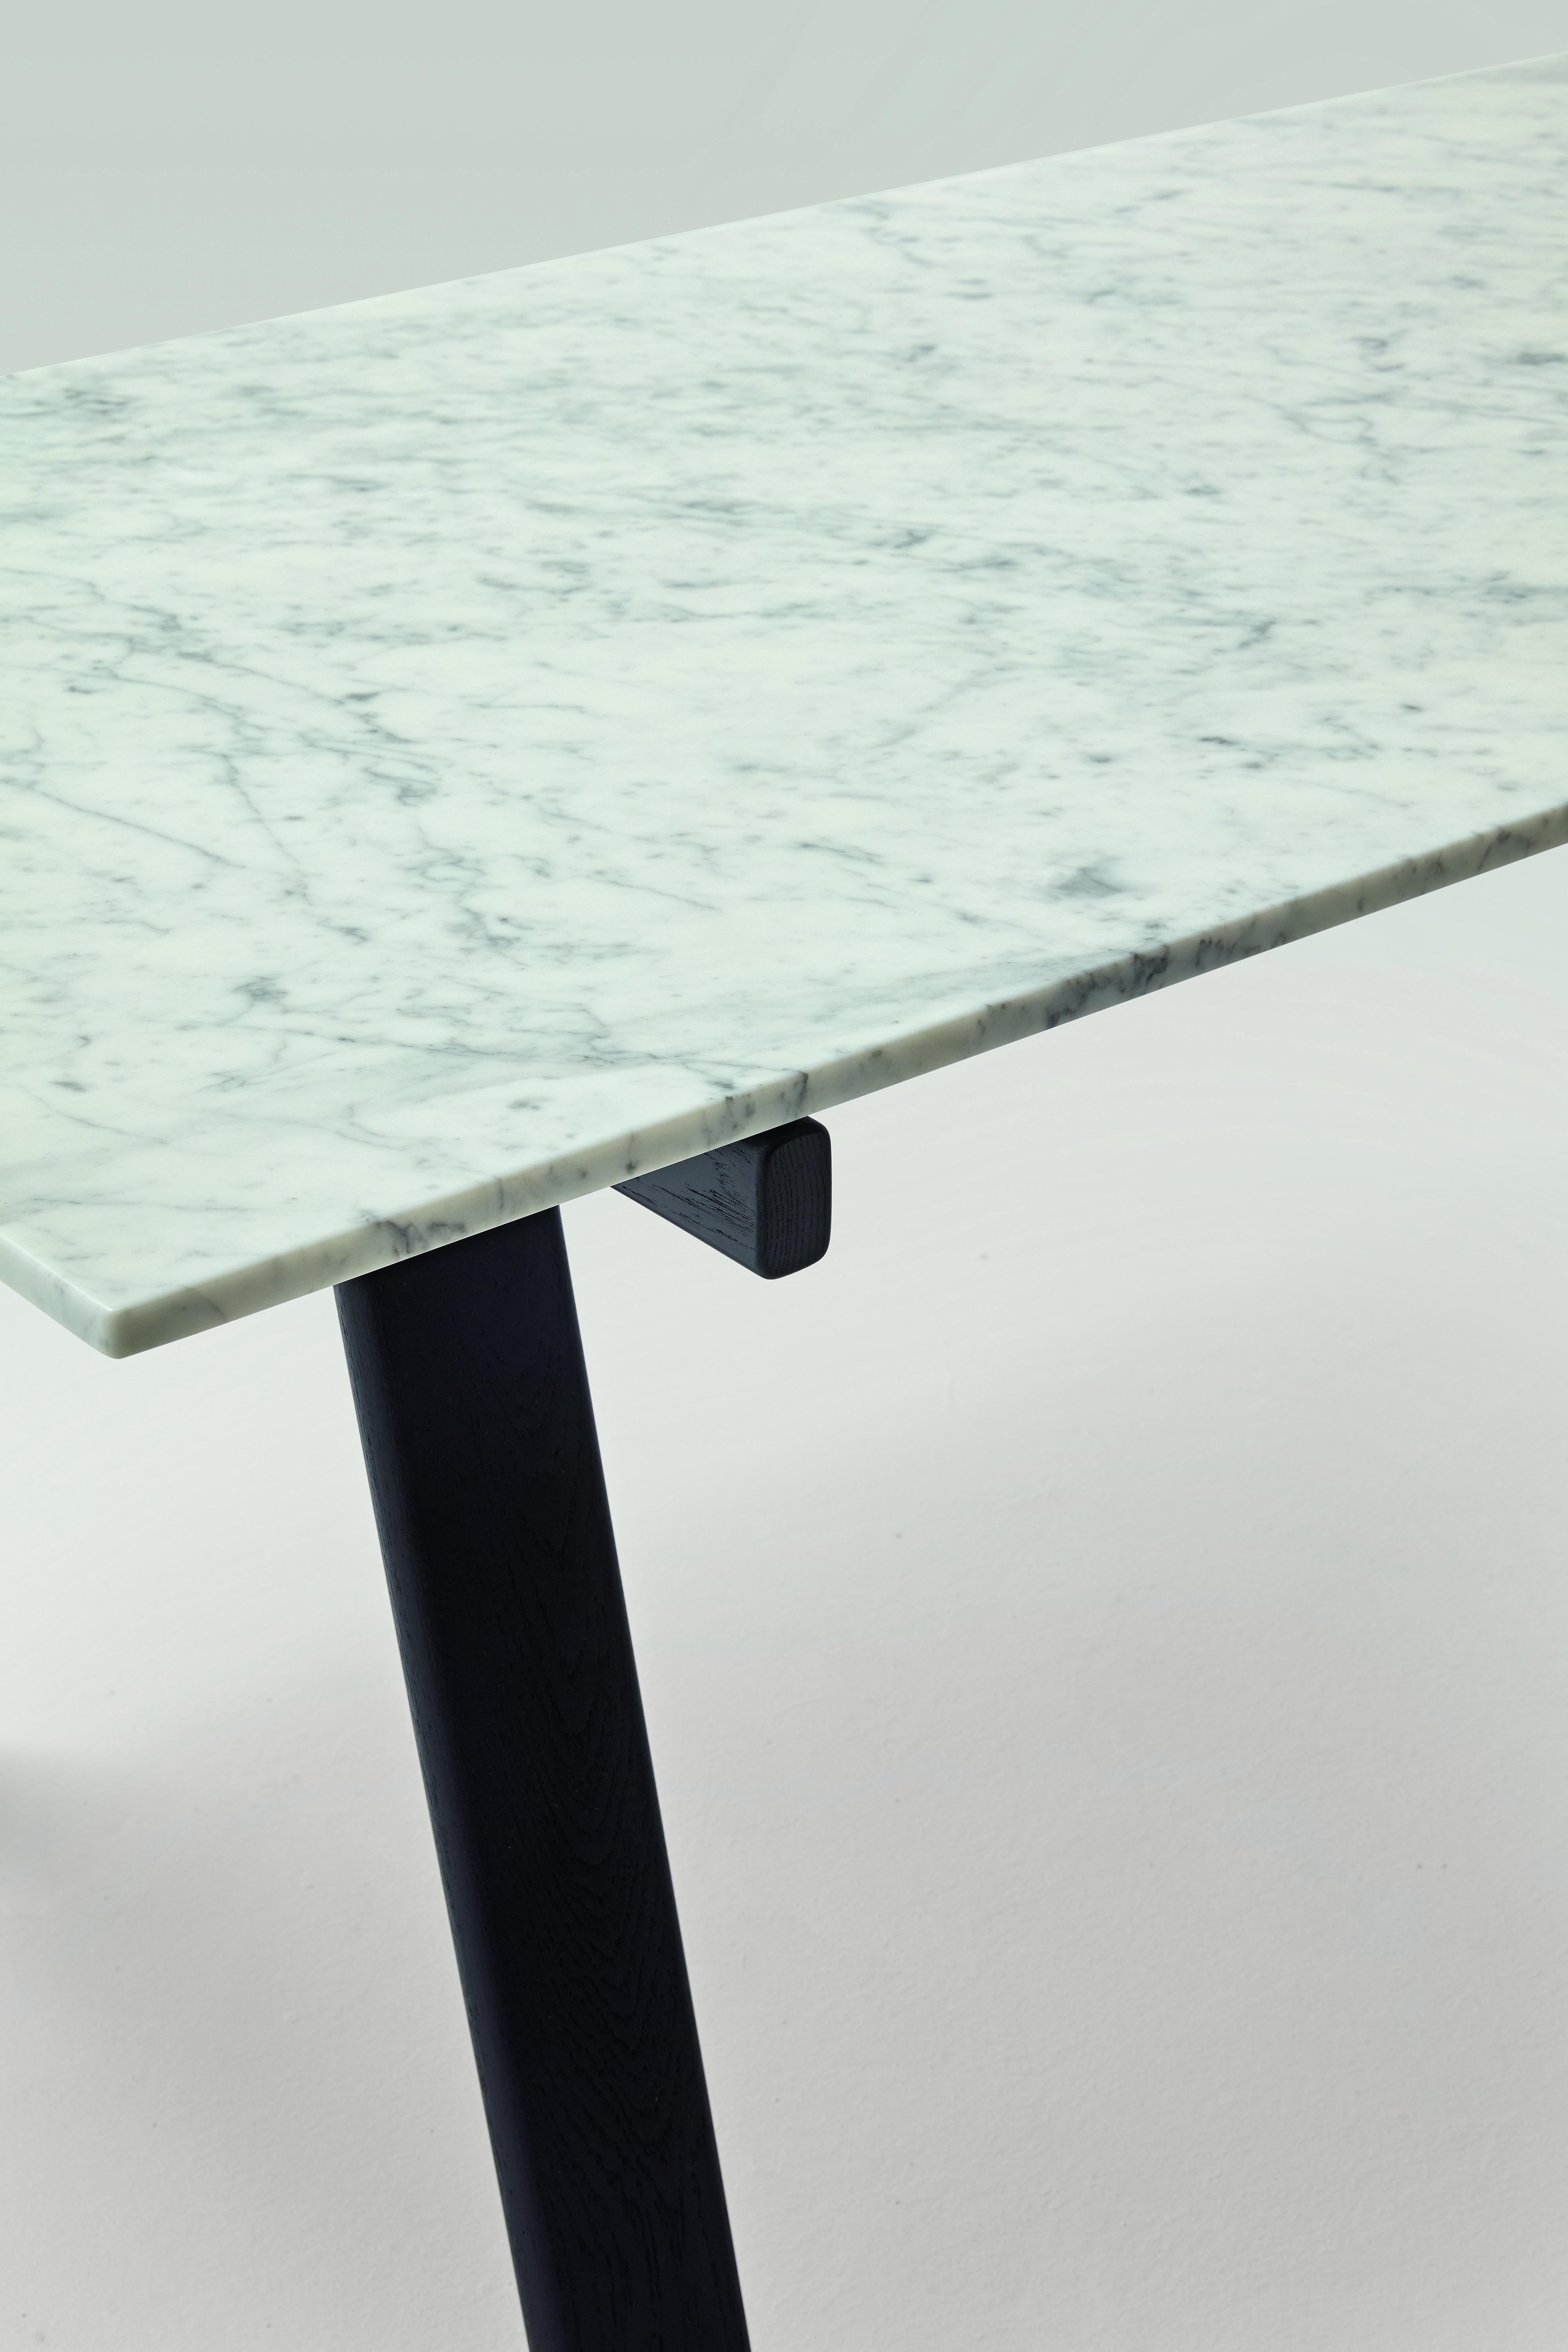 Zanotta Medium Ambrosiano Table in Carrara Marble Top with Black Frame by Mist-o

Trestles in solid natural oak or painted black with open pore. Matt black painted stainless steel spars. Top available either in 1/2” thick smoky grey tempered plate